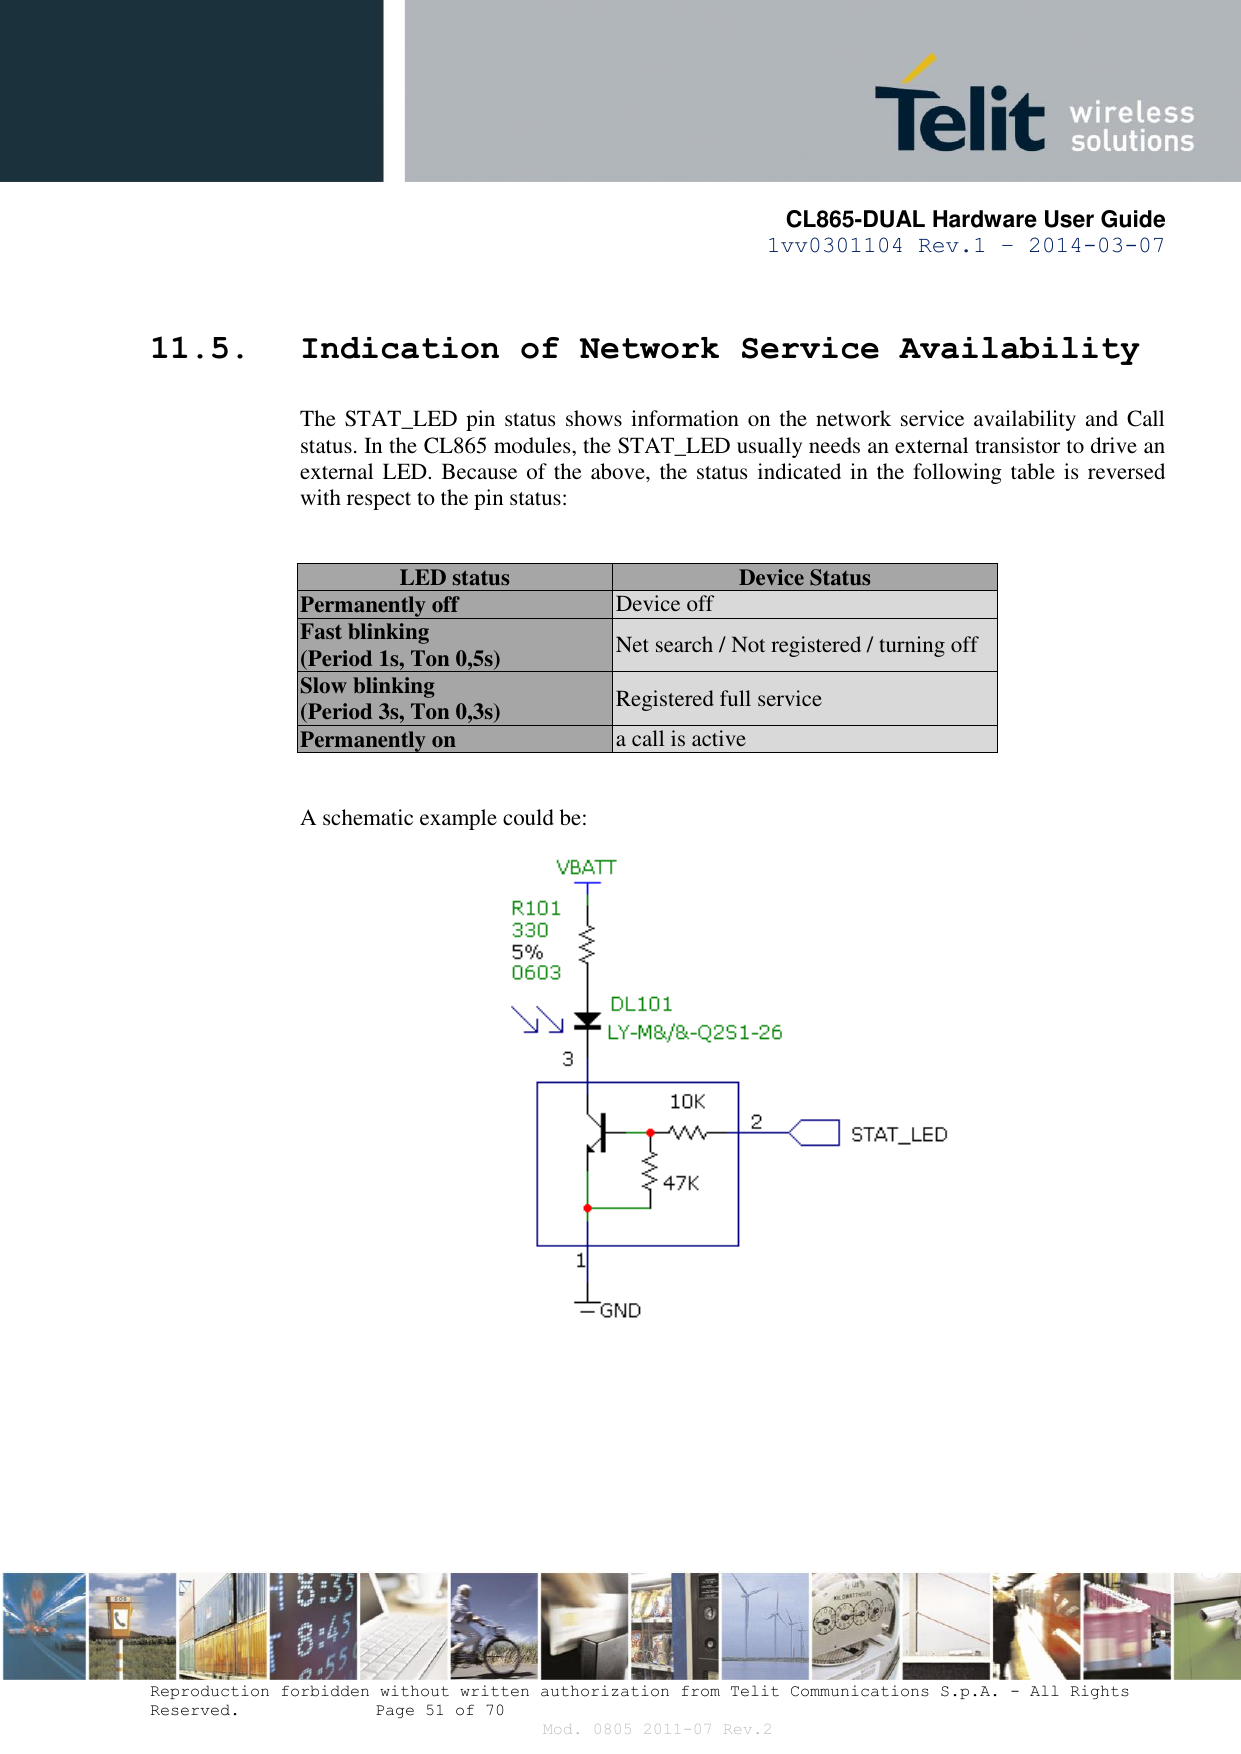       CL865-DUAL Hardware User Guide 1vv0301104 Rev.1 – 2014-03-07  Reproduction forbidden without written authorization from Telit Communications S.p.A. - All Rights Reserved.    Page 51 of 70 Mod. 0805 2011-07 Rev.2 11.5. Indication of Network Service Availability The STAT_LED pin status shows information on the network service availability and Call status. In the CL865 modules, the STAT_LED usually needs an external transistor to drive an external LED. Because of the above, the status indicated in the following table is reversed with respect to the pin status:  LED status Device Status Permanently off Device off Fast blinking (Period 1s, Ton 0,5s) Net search / Not registered / turning off Slow blinking (Period 3s, Ton 0,3s) Registered full service Permanently on a call is active  A schematic example could be:       